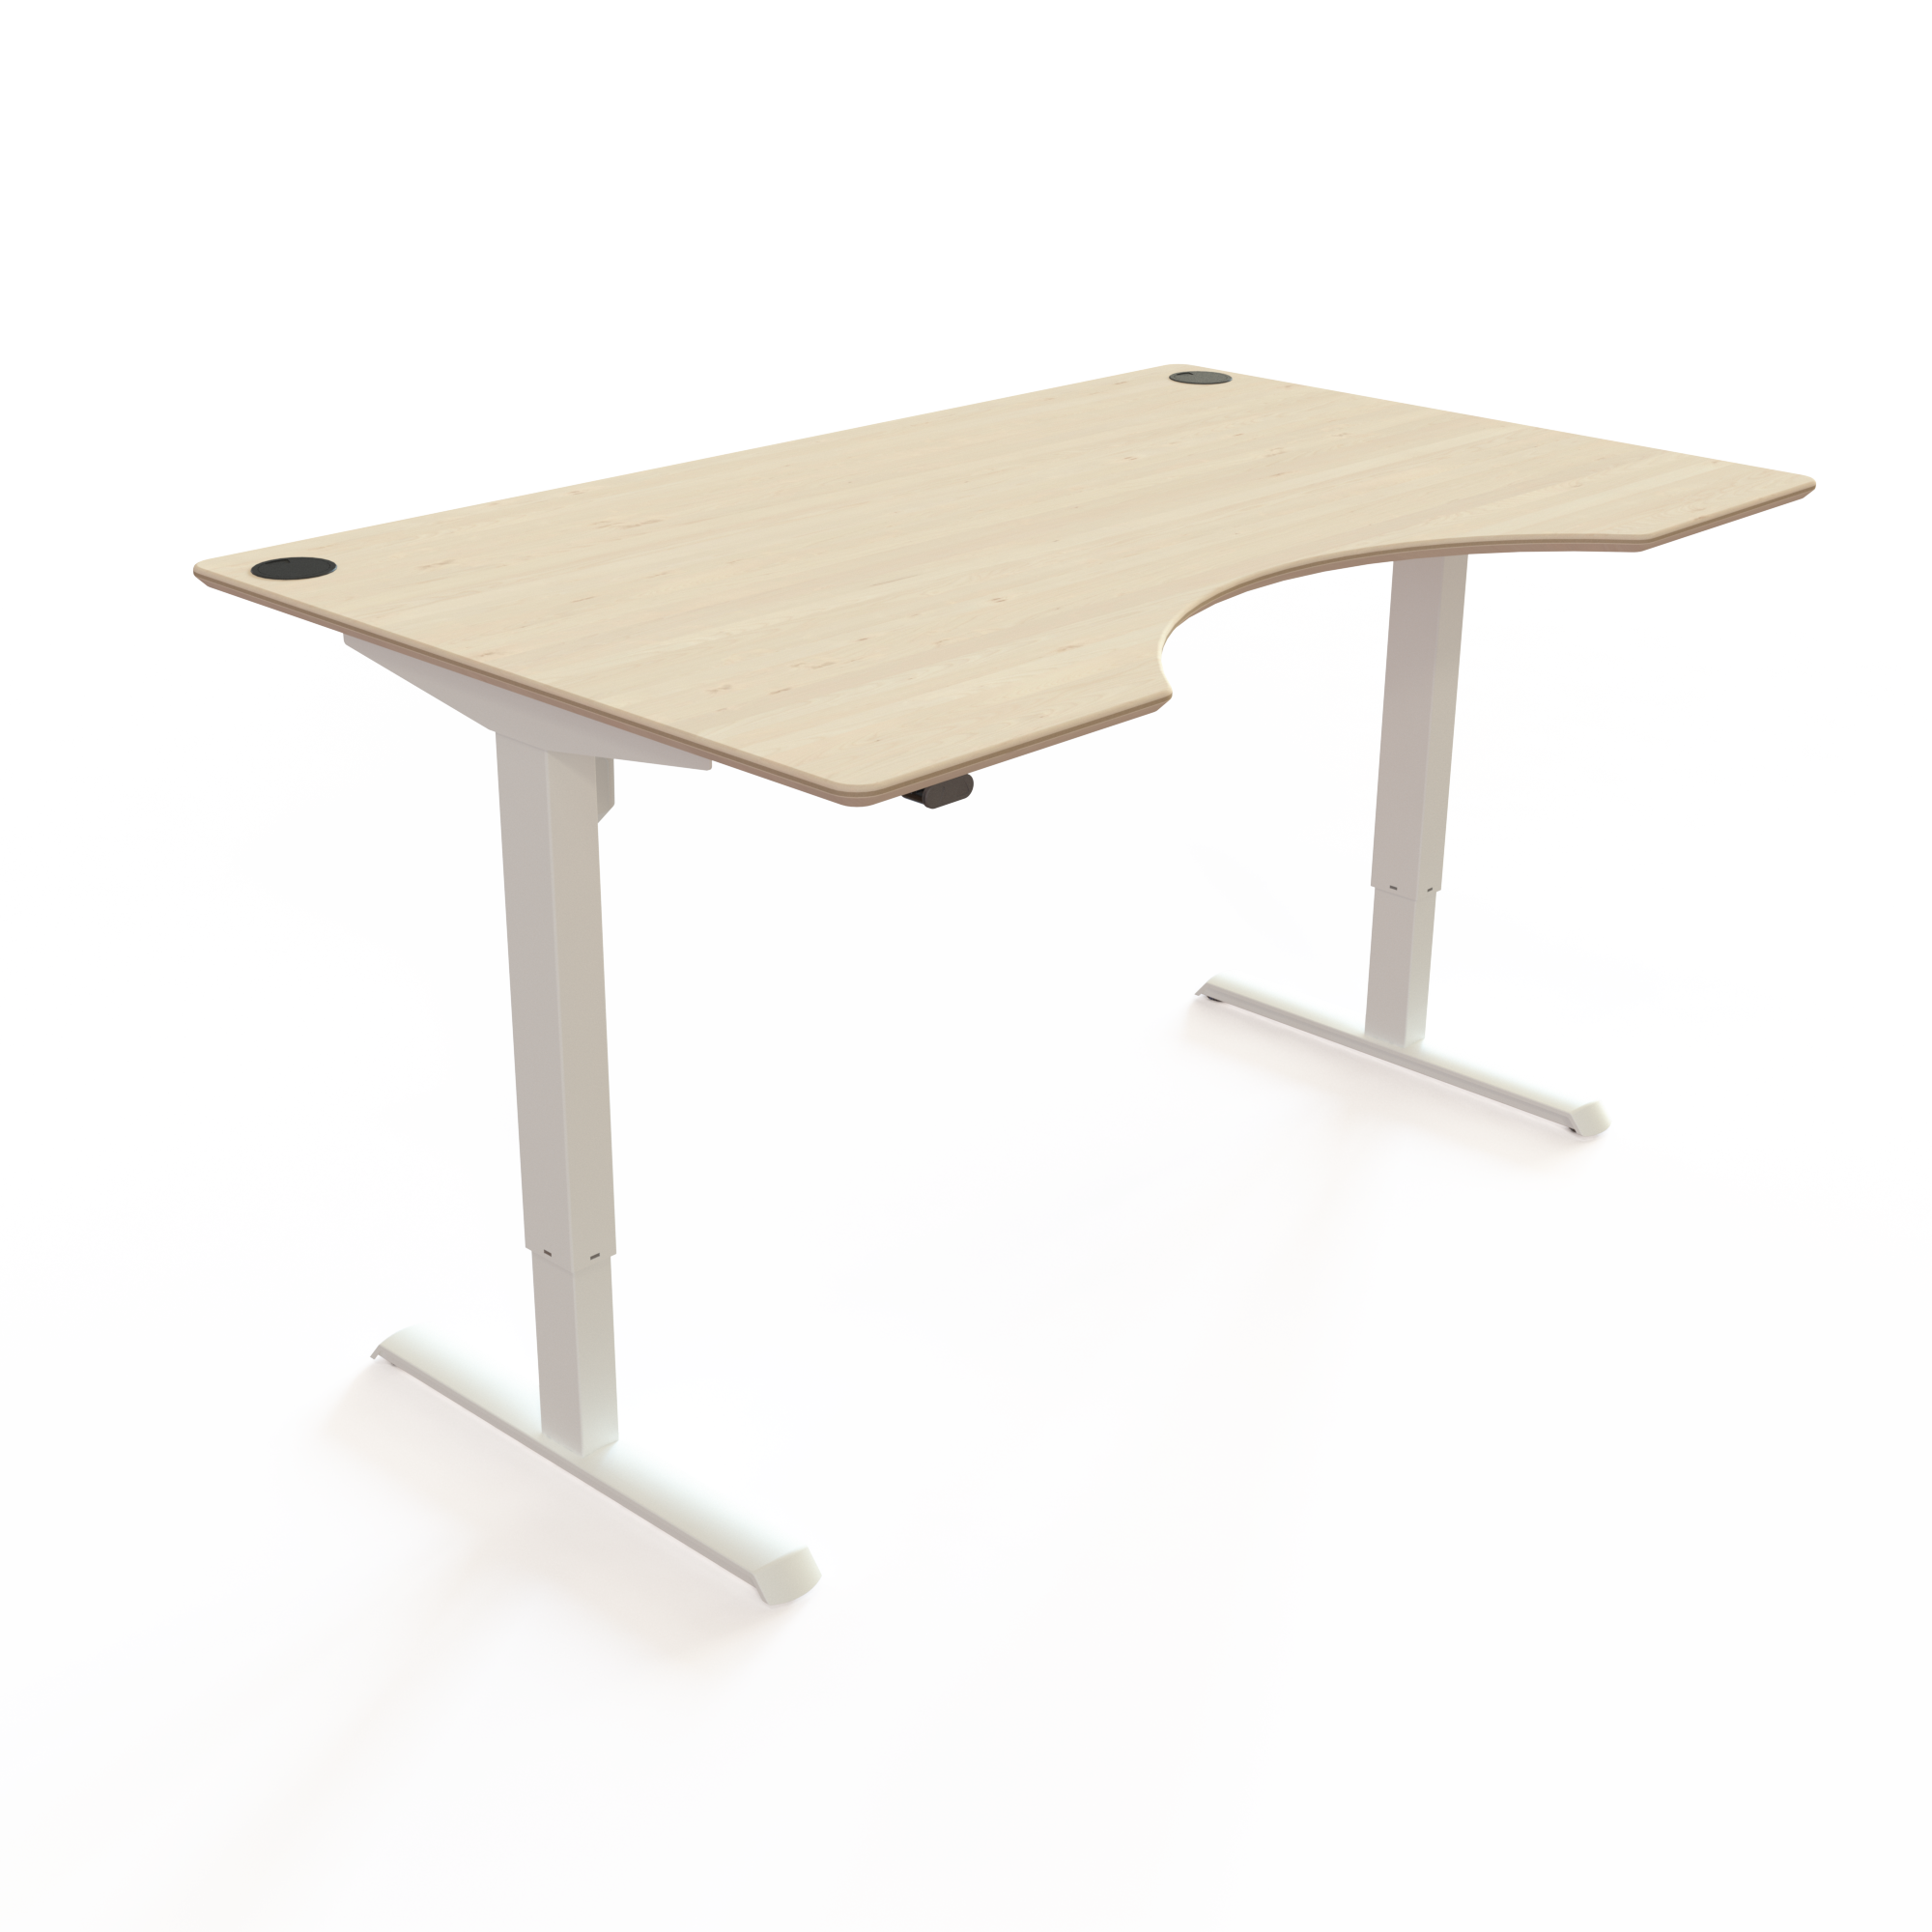 Electric Adjustable Desk | 160x100 cm | Maple with white frame